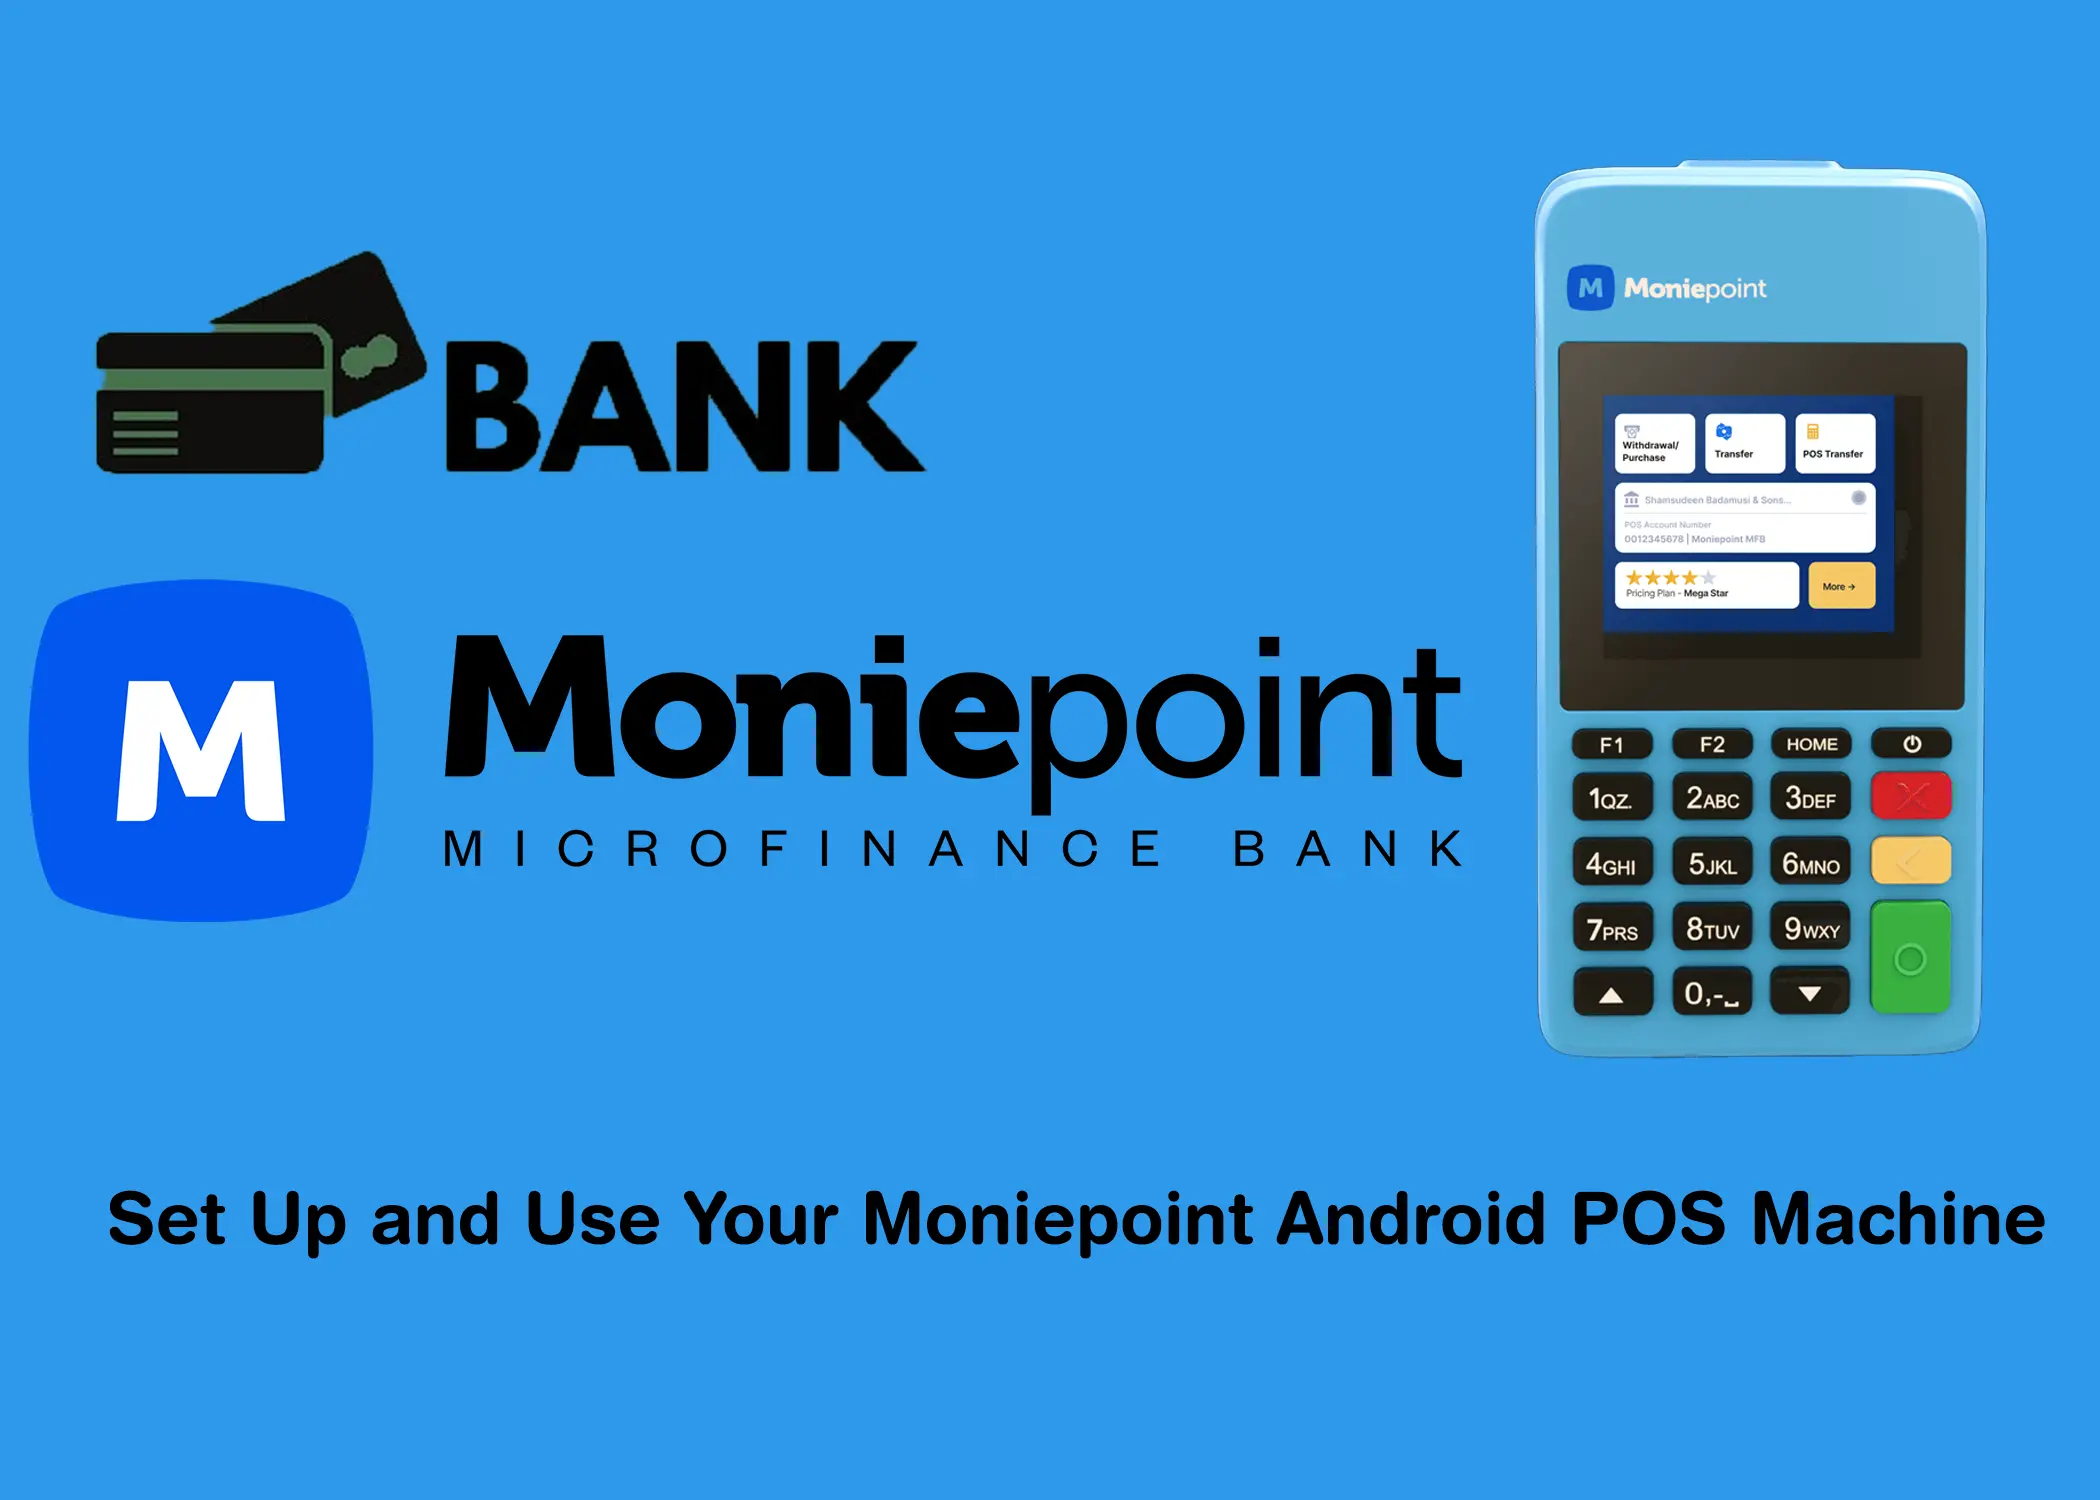 How to Set Up & Use Your Moniepoint Android POS Machine